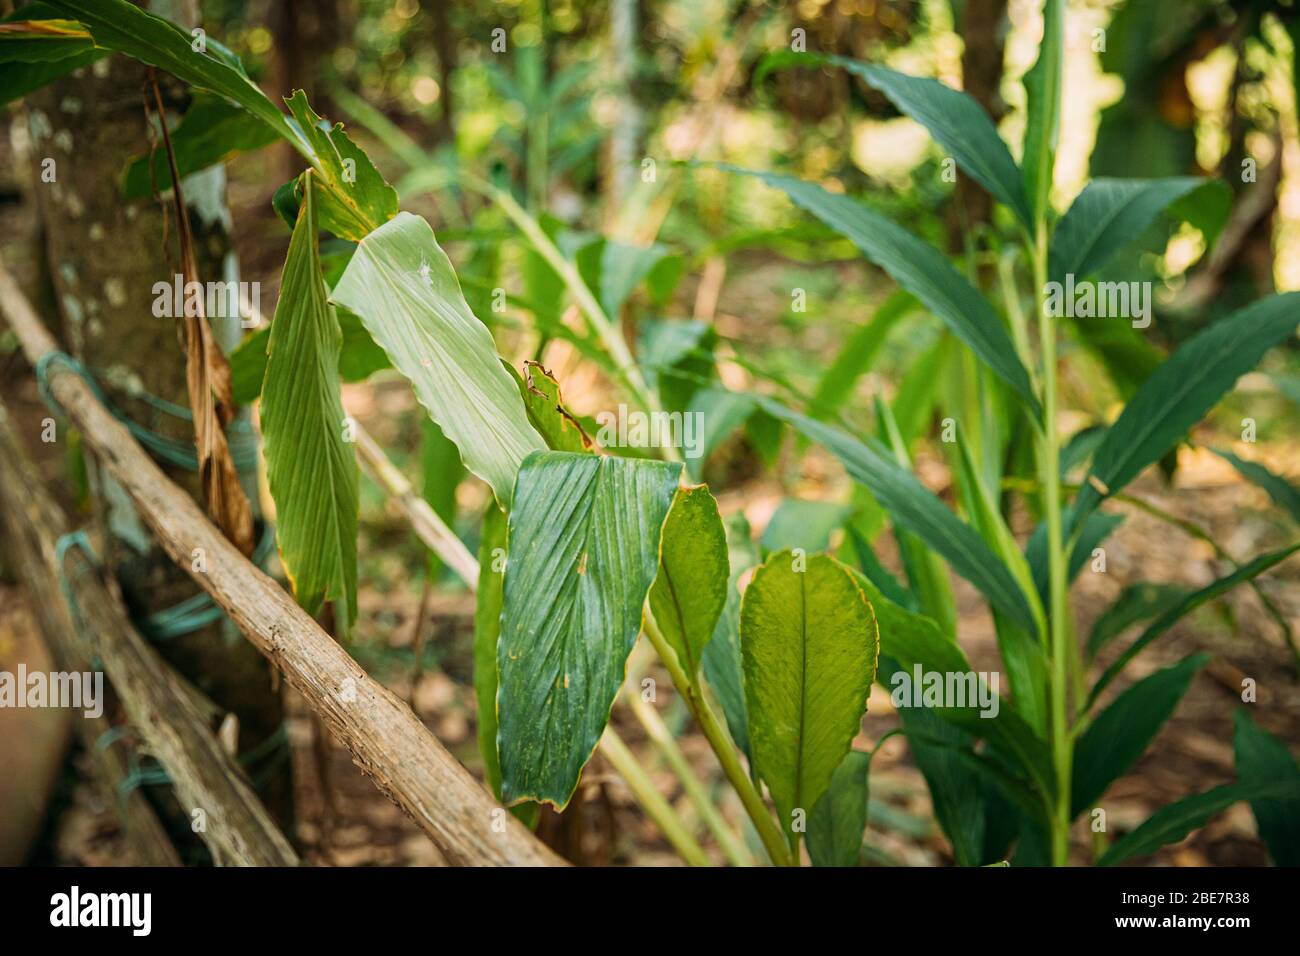 Goa, India. Leaves Of Elettaria Cardamomum, Commonly Known As Green Or True Cardamom. Stock Photo